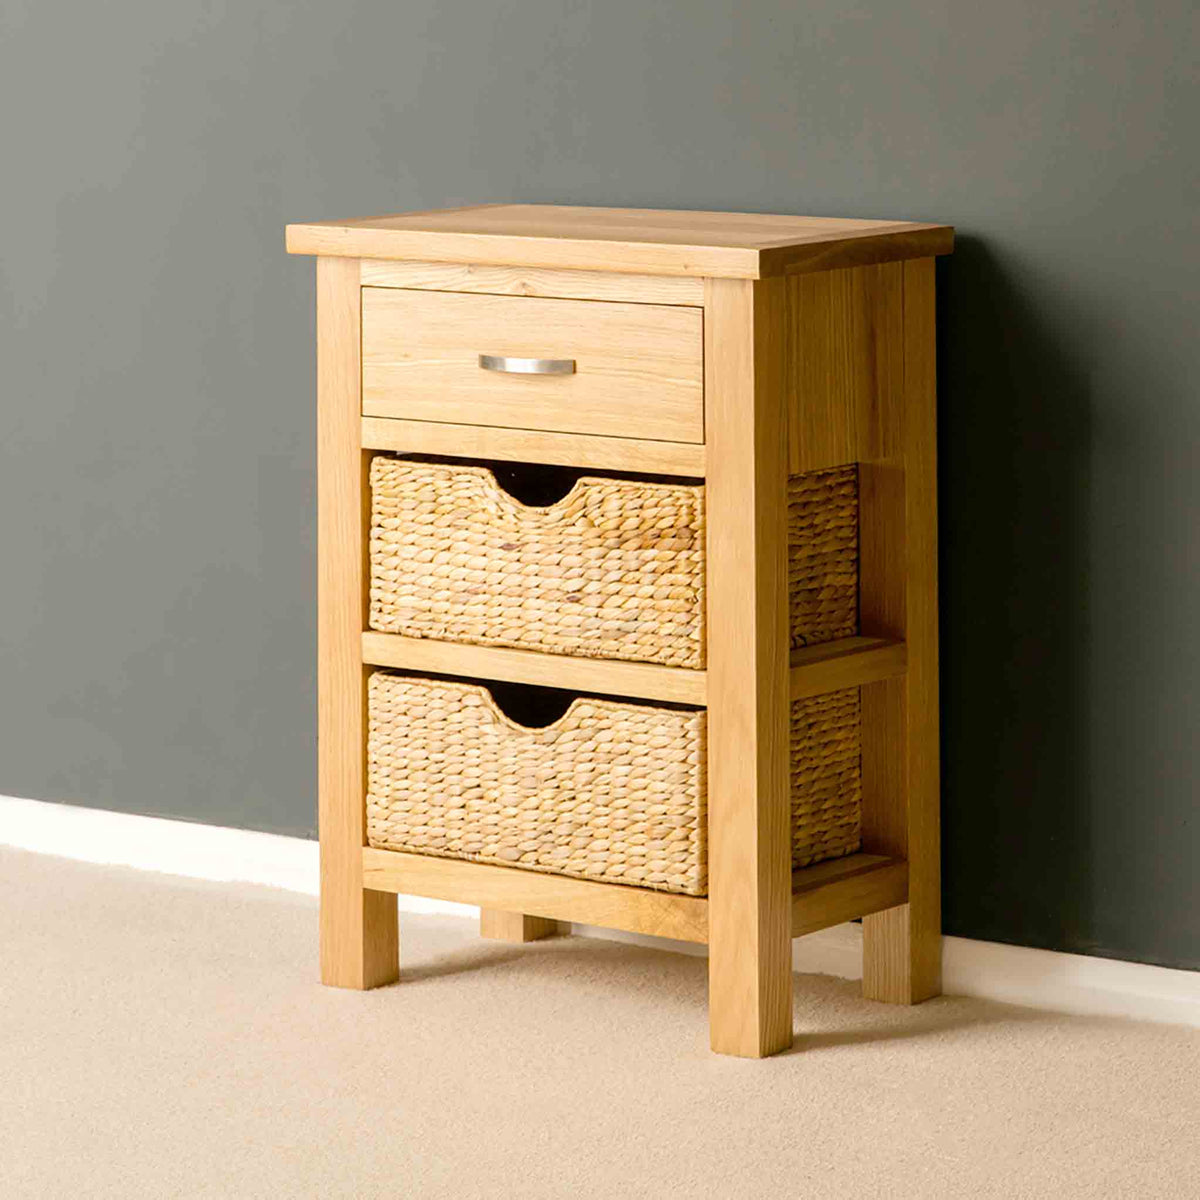 London Oak Hall Table with Baskets - Side View